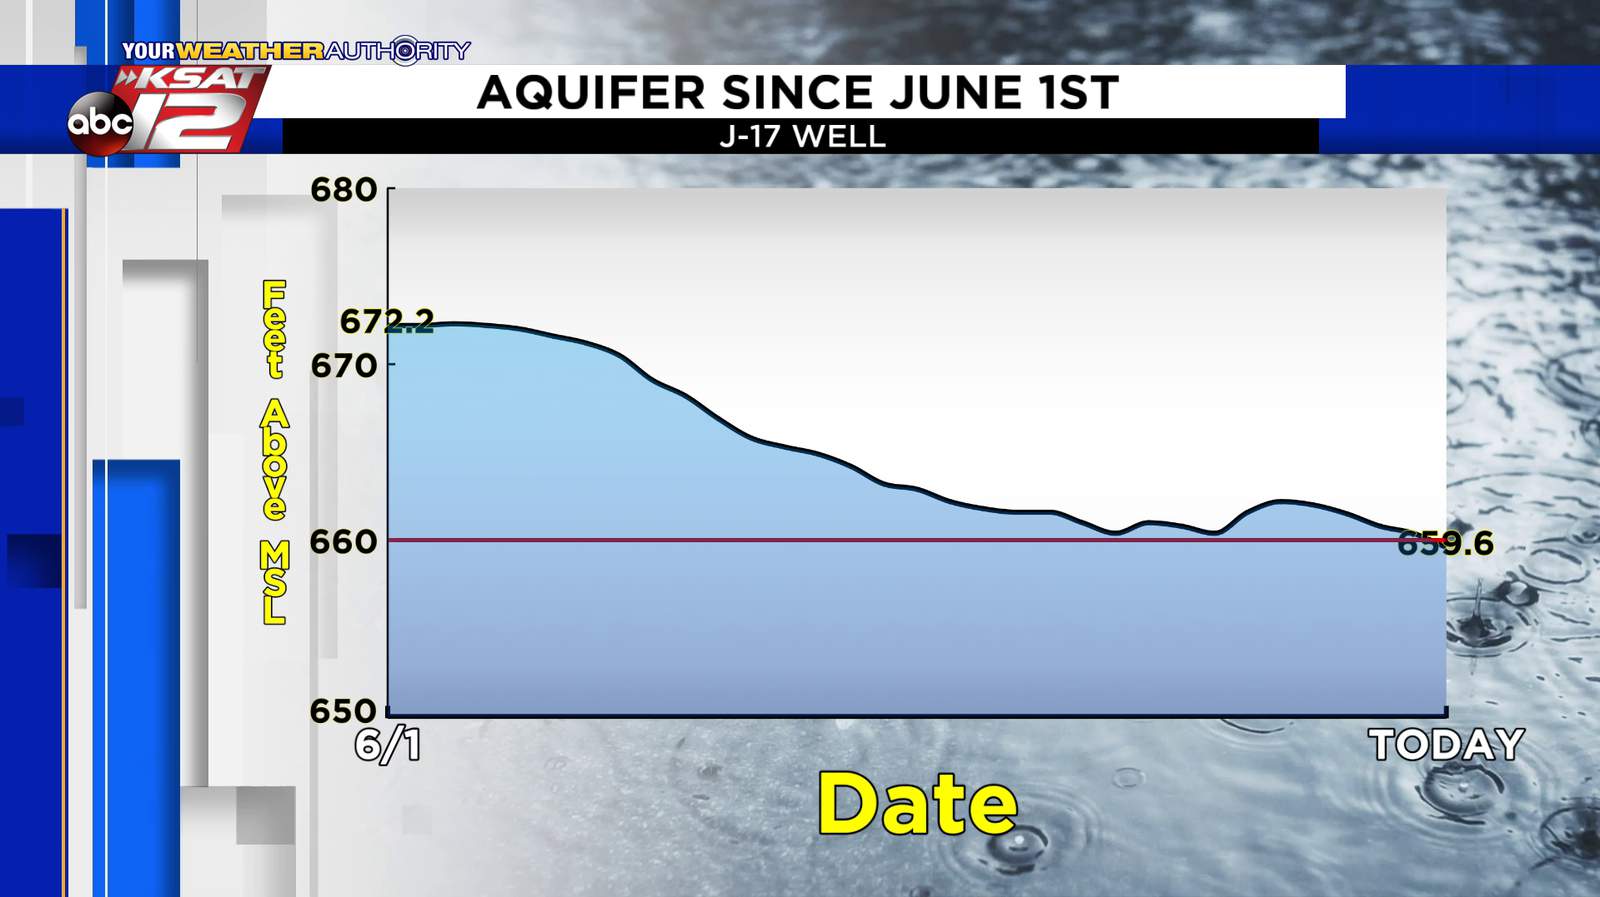 Edwards Aquifer drops below 660 feet for the first time since September 2018